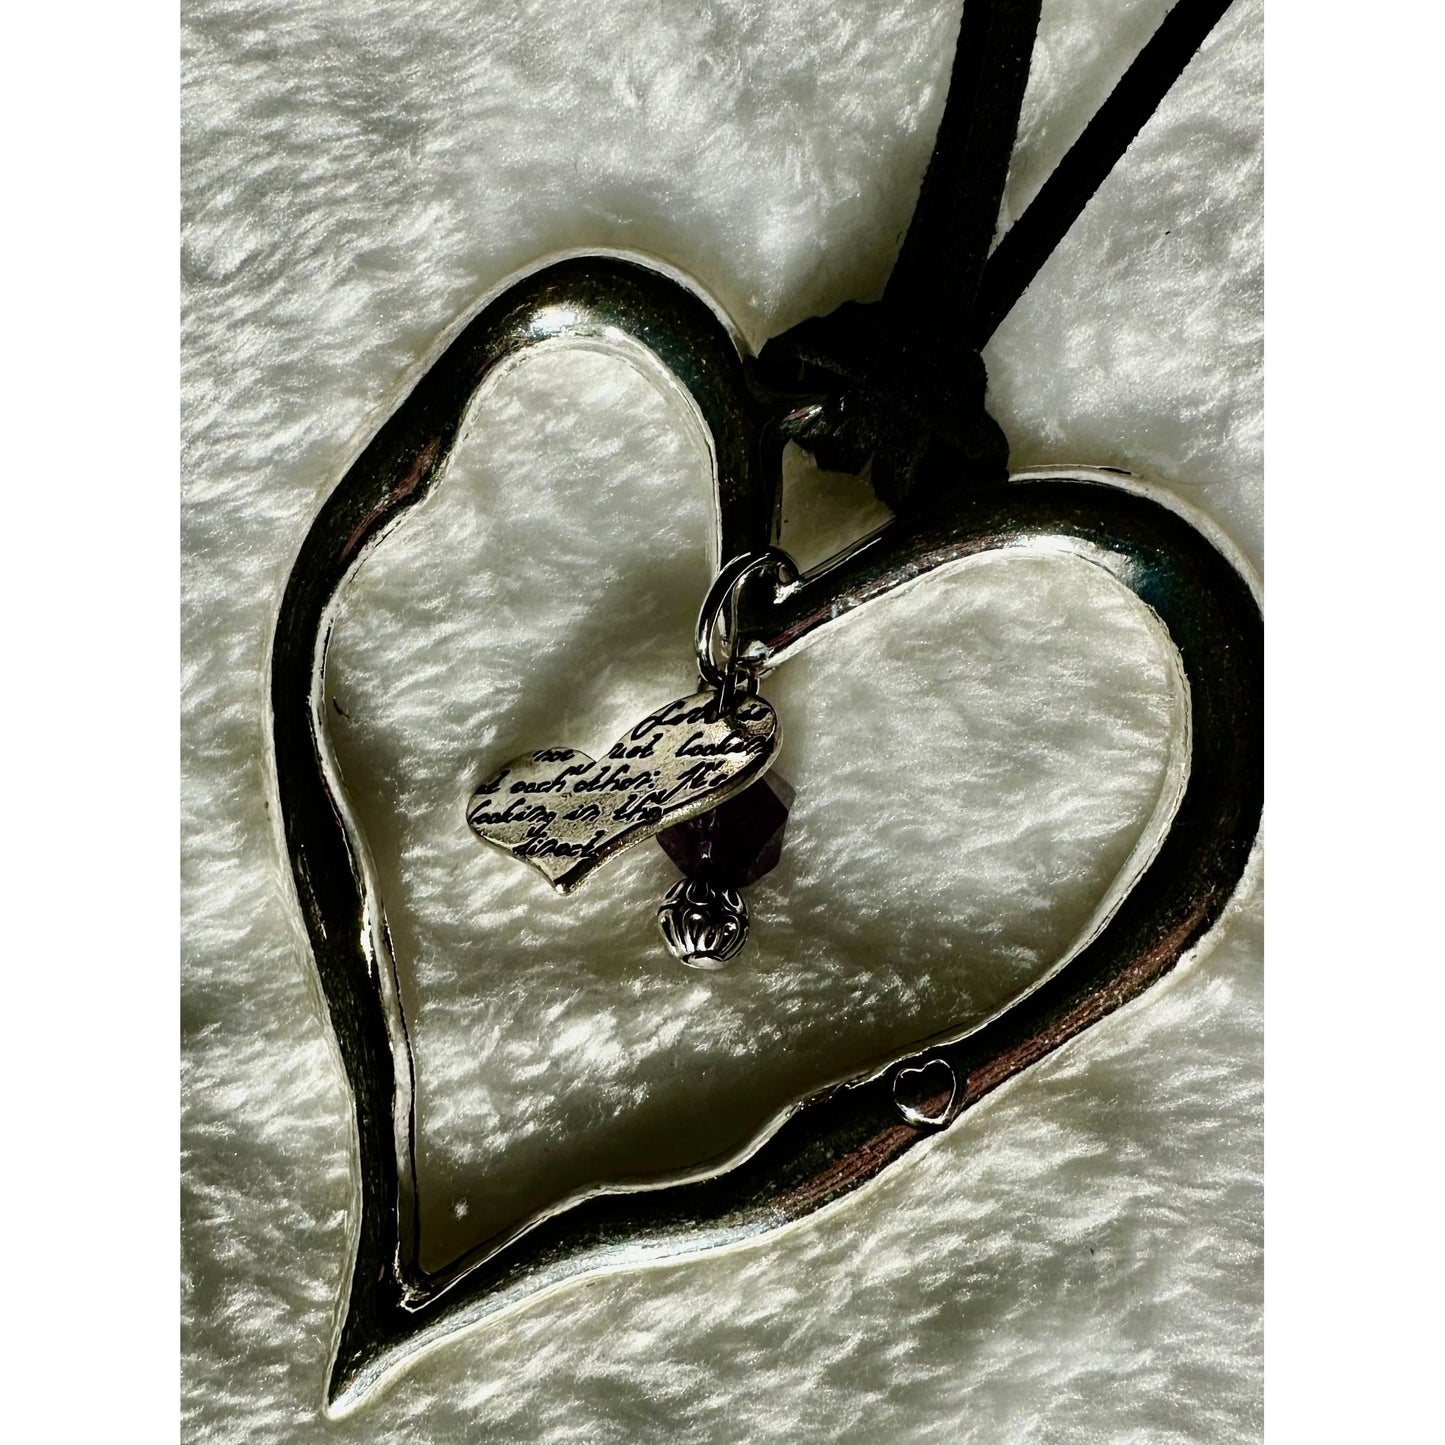 Lydia Heart Pendant Necklace - Rhapsody and Renascence